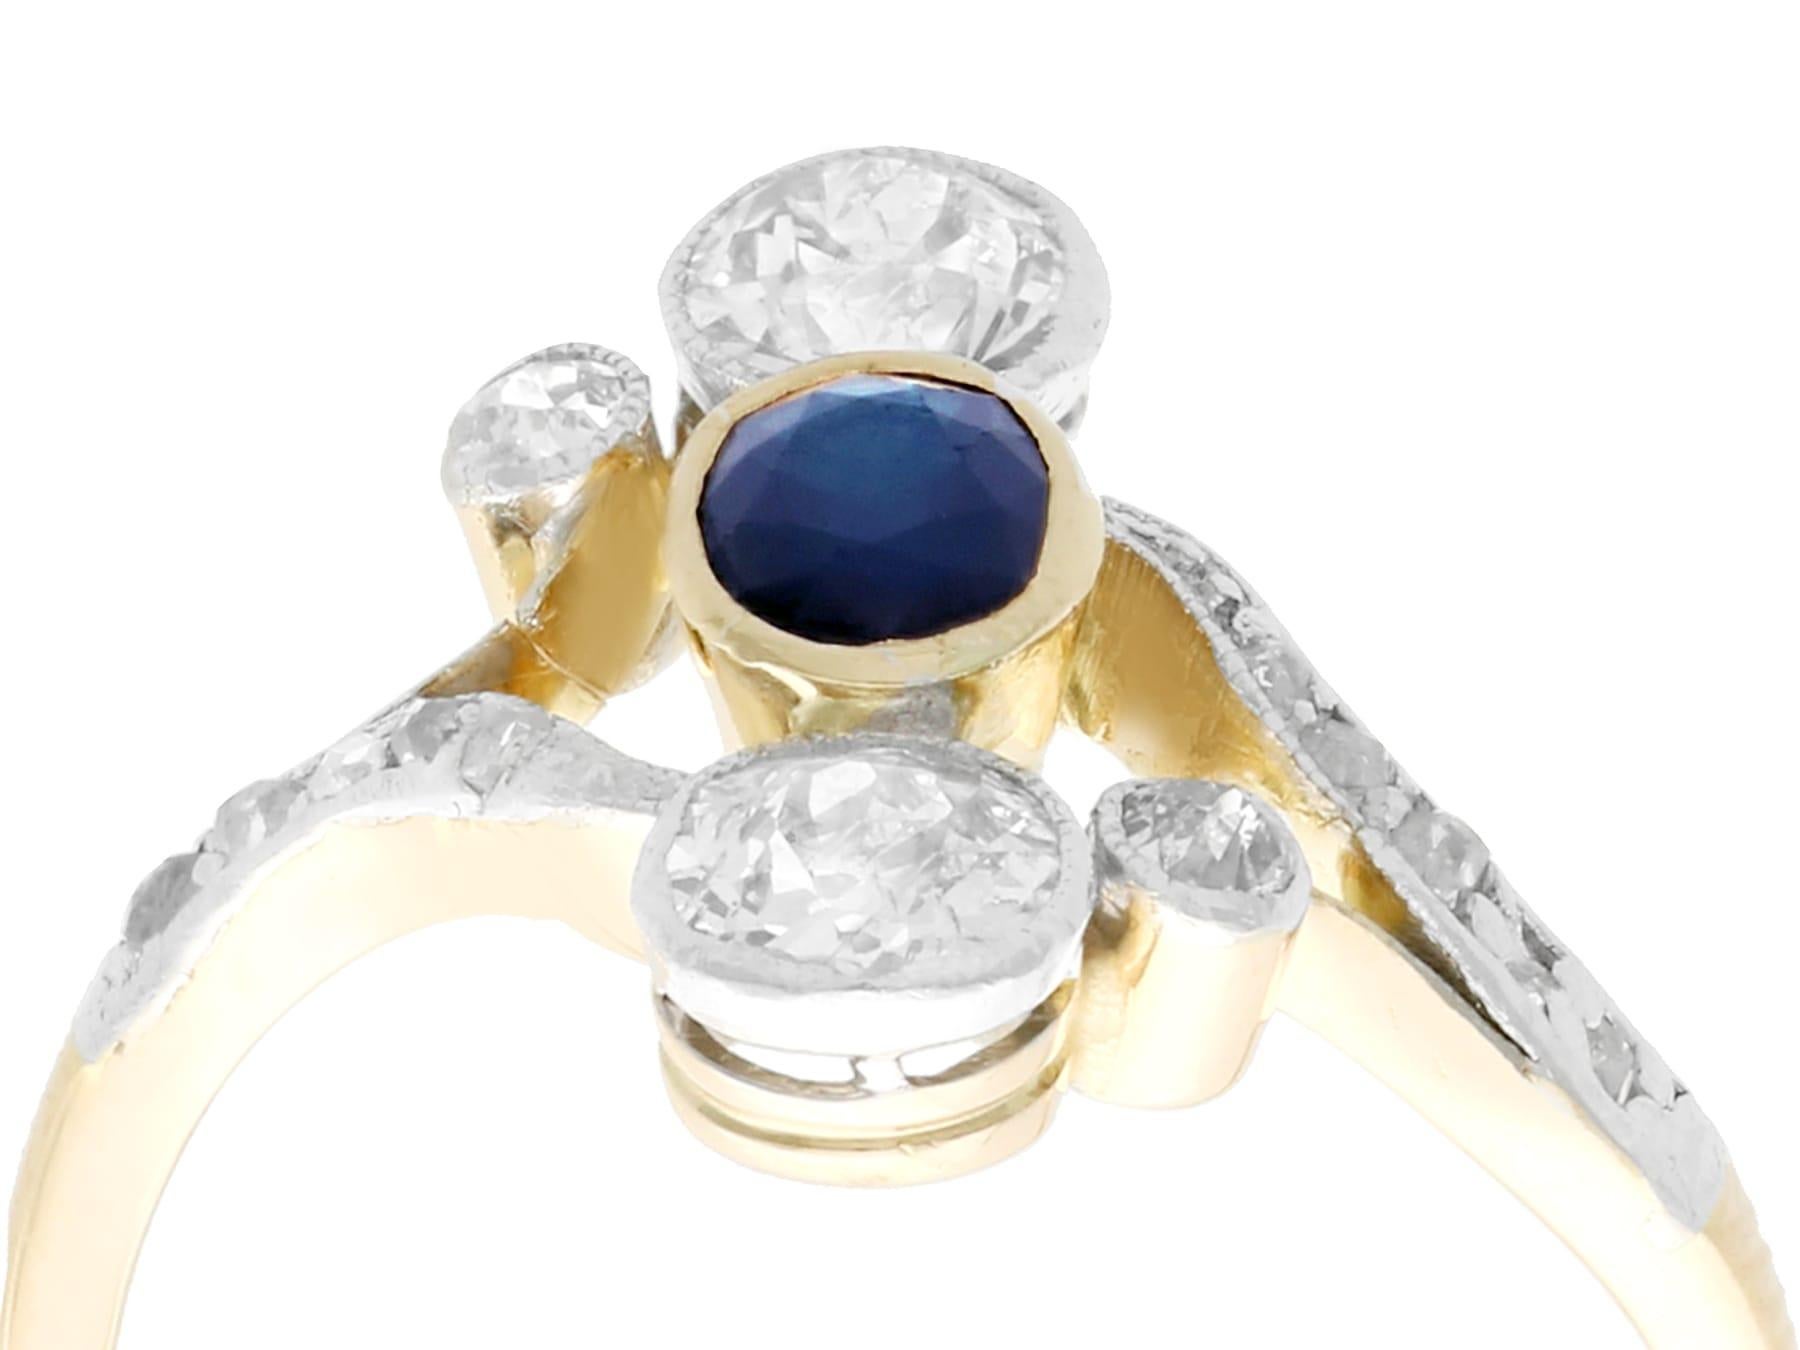 An impressive 0.37 carat sapphire and 0.83 carat diamond, 14 karat yellow gold and 14 karat white gold twist ring; part of our diverse antique jewelry collections.

This fine and impressive sapphire and diamond ring has been crafted in 14k yellow